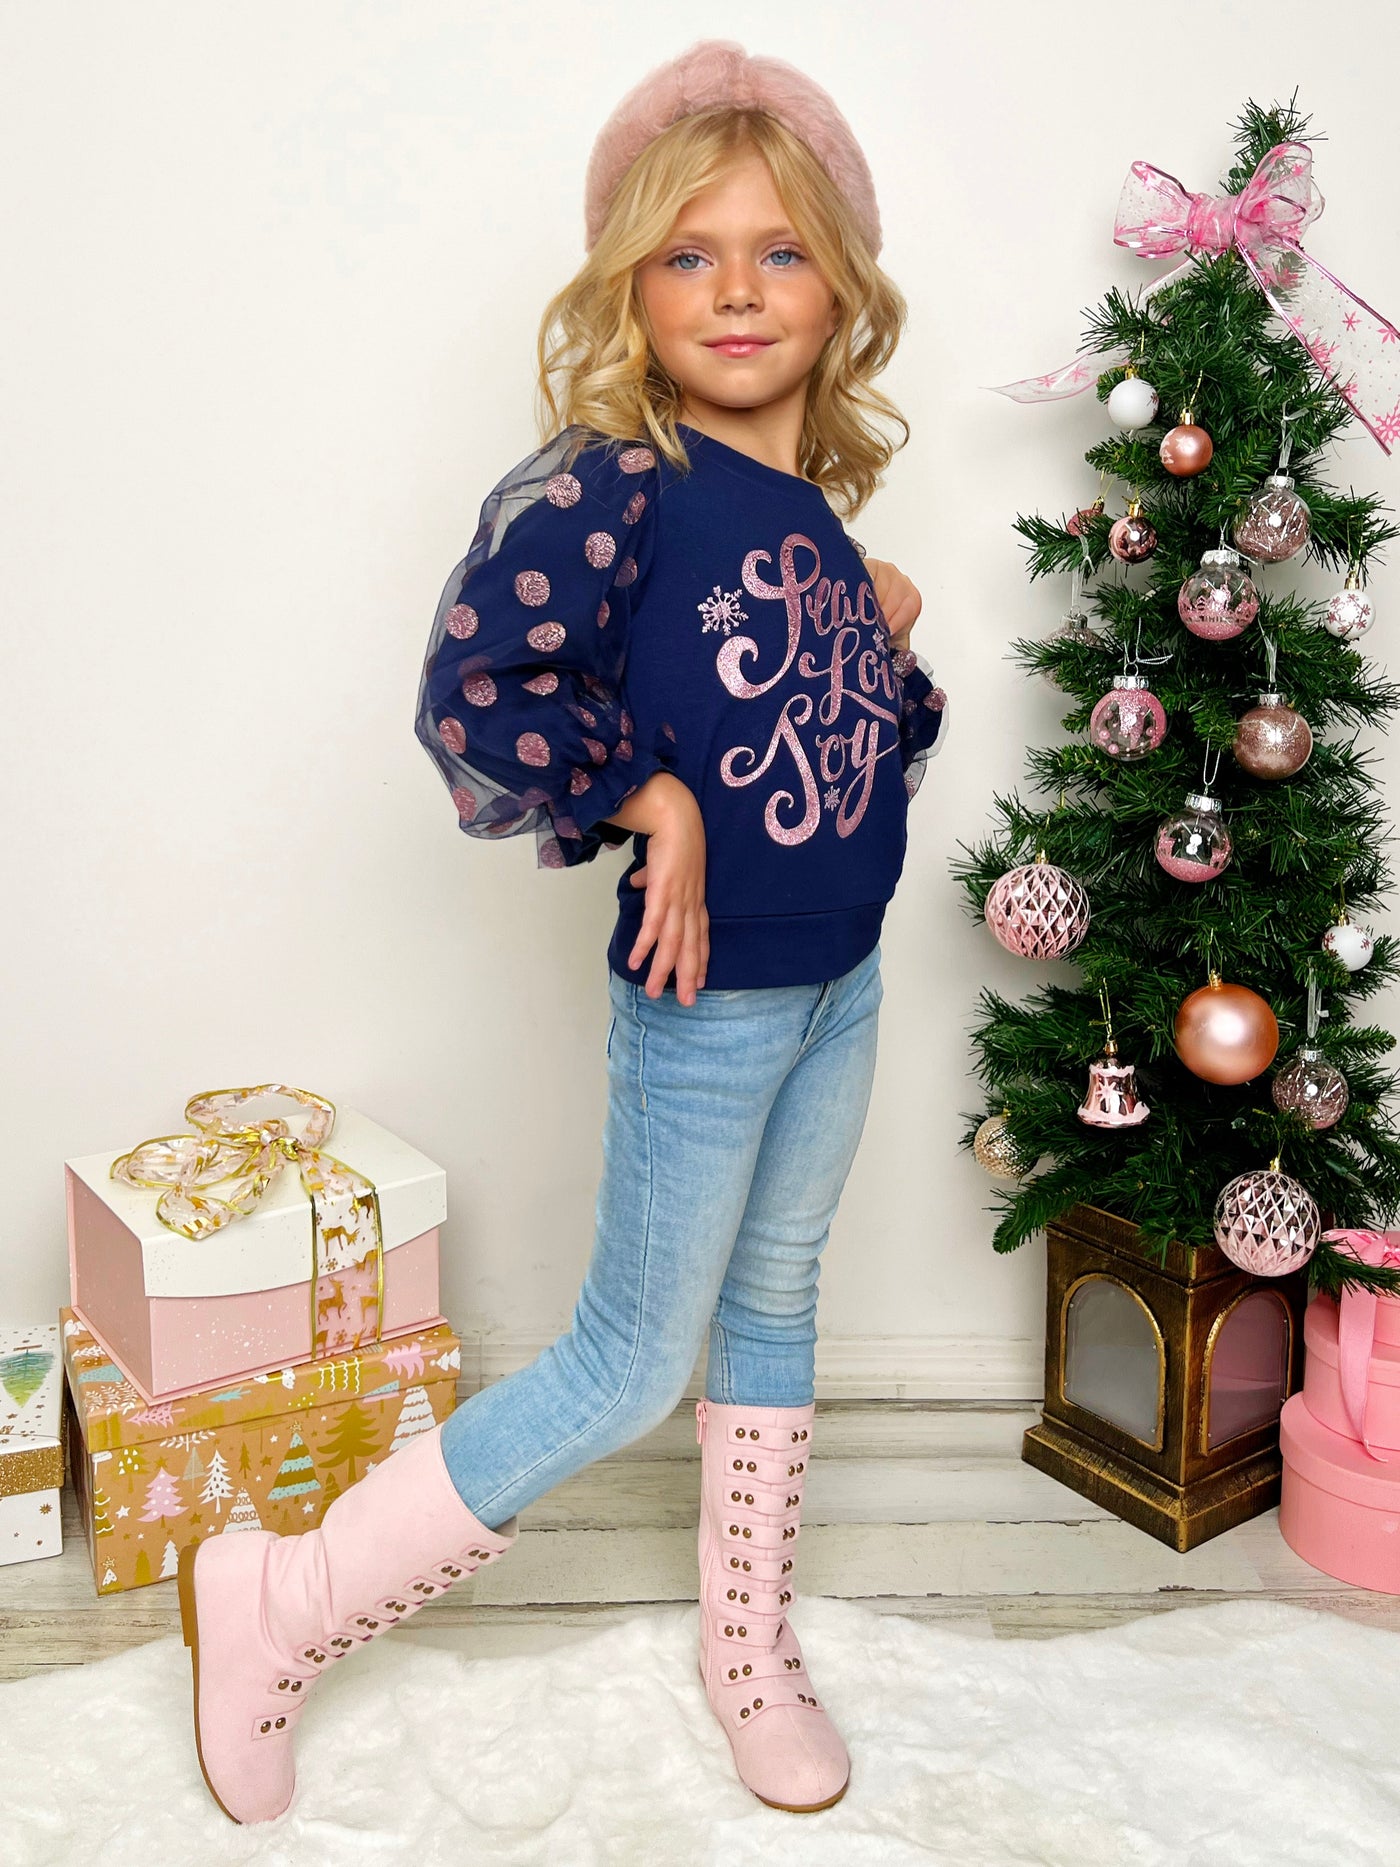 Mia Belle Girls Tulle Sleeve Top | Girls Holiday Outfits